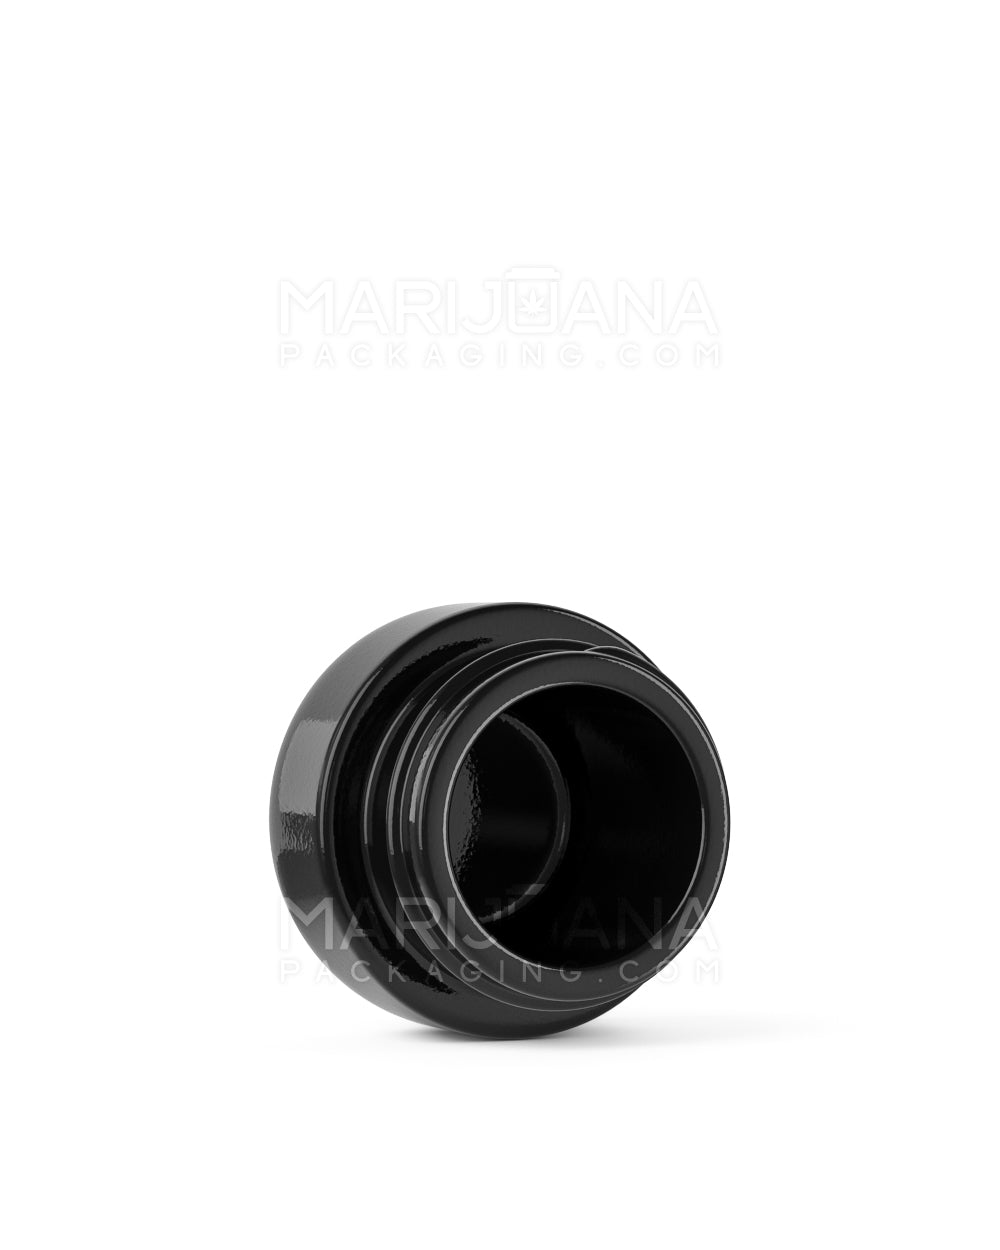 POLLEN GEAR | HiLine Glossy Black Glass Concentrate Containers | 36mm - 5mL - 308 Count